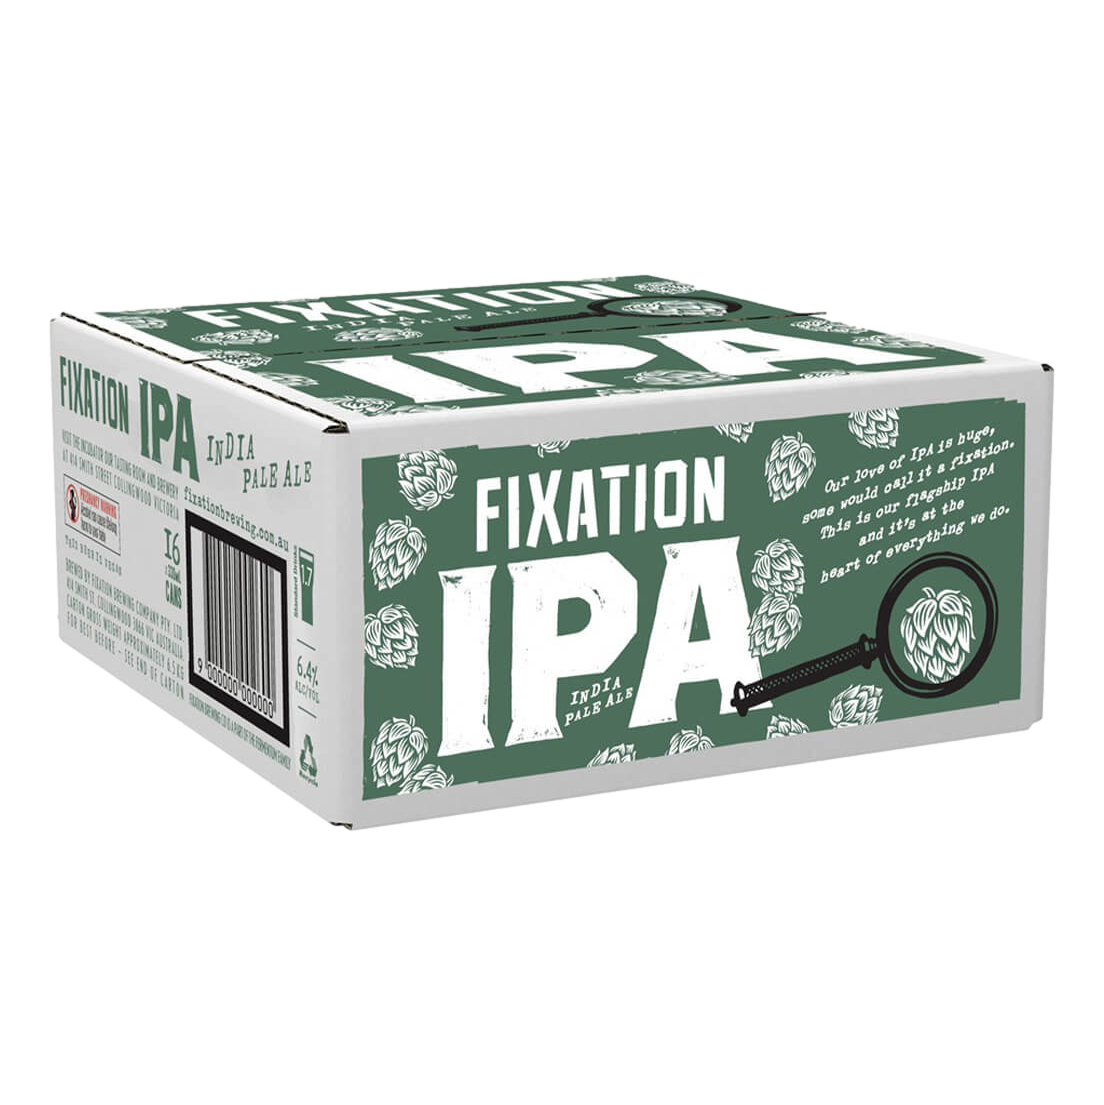 Fixation IPA 330ml Can Case of 16